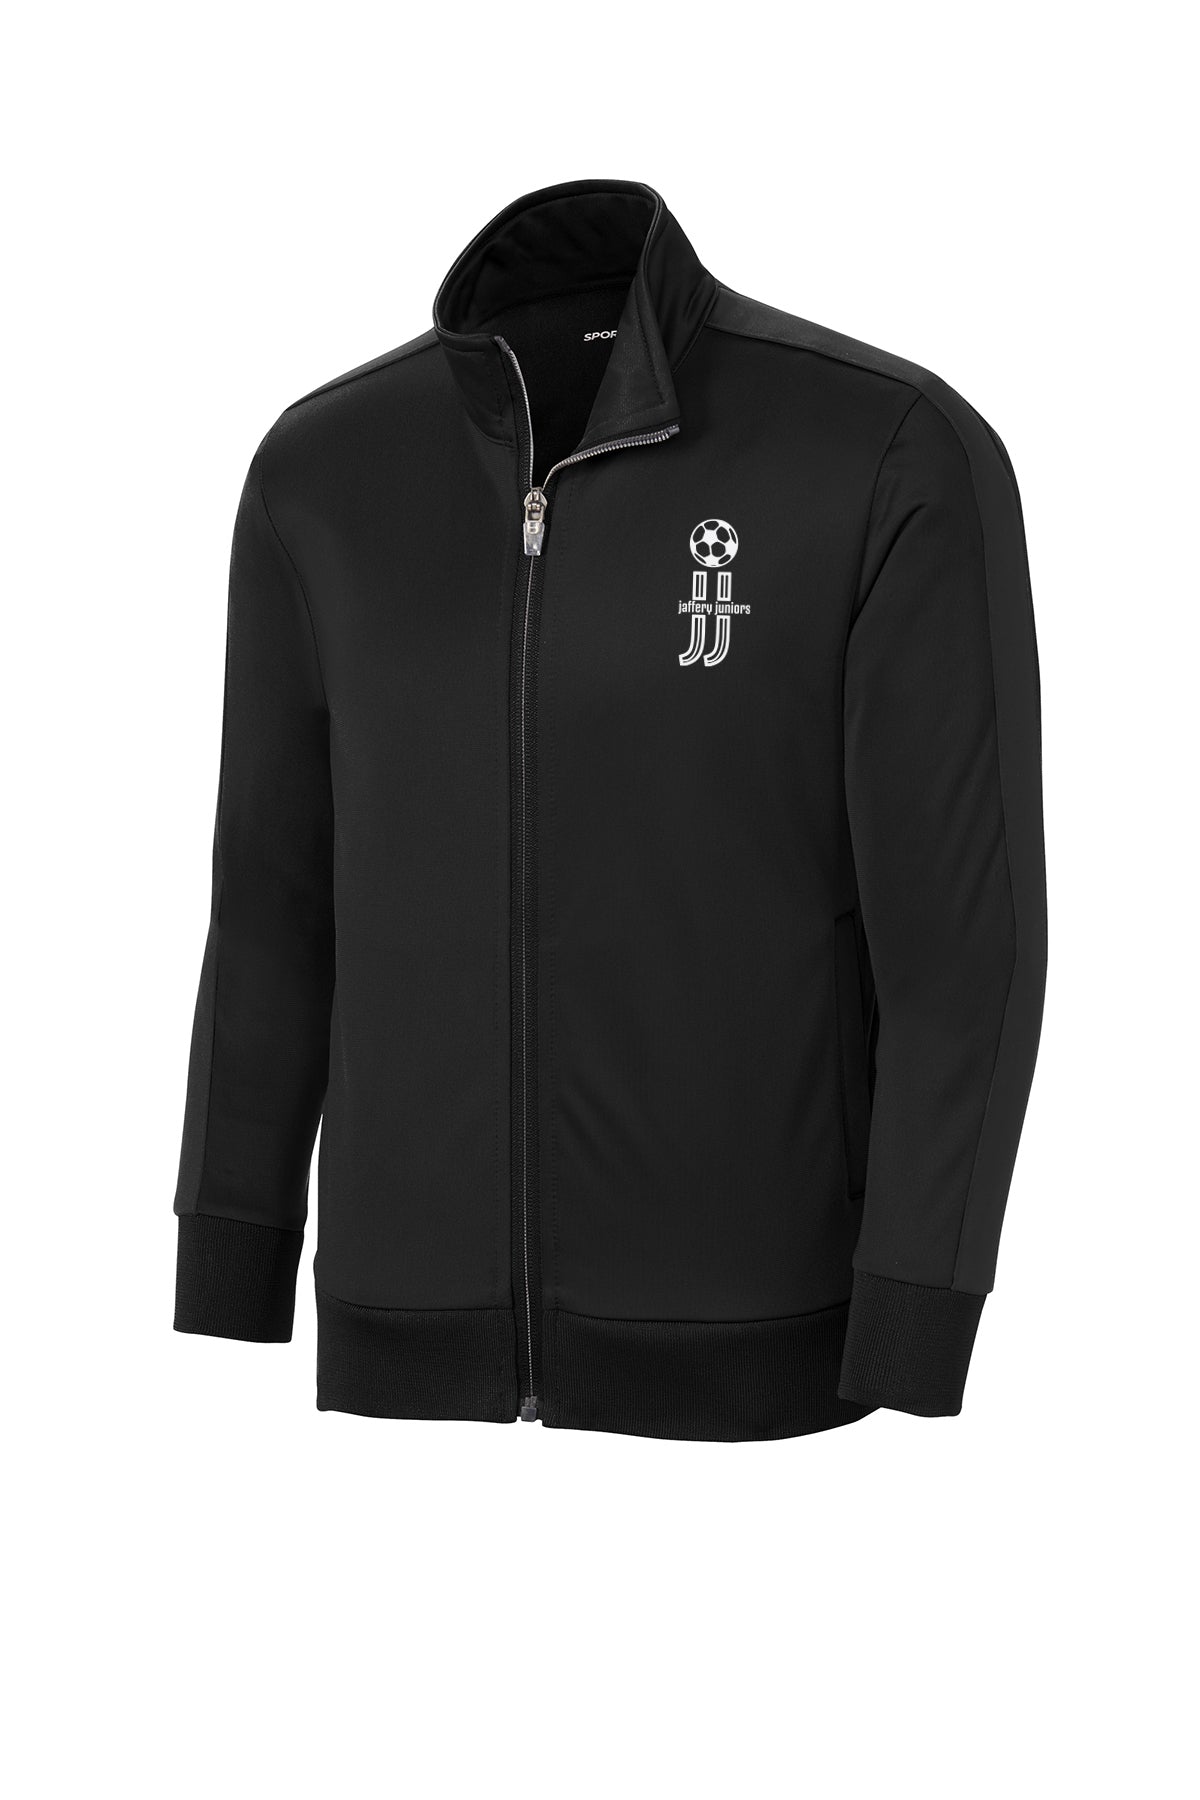 Jaffery Juniors Embroidered Track Jacket (youth/adult)